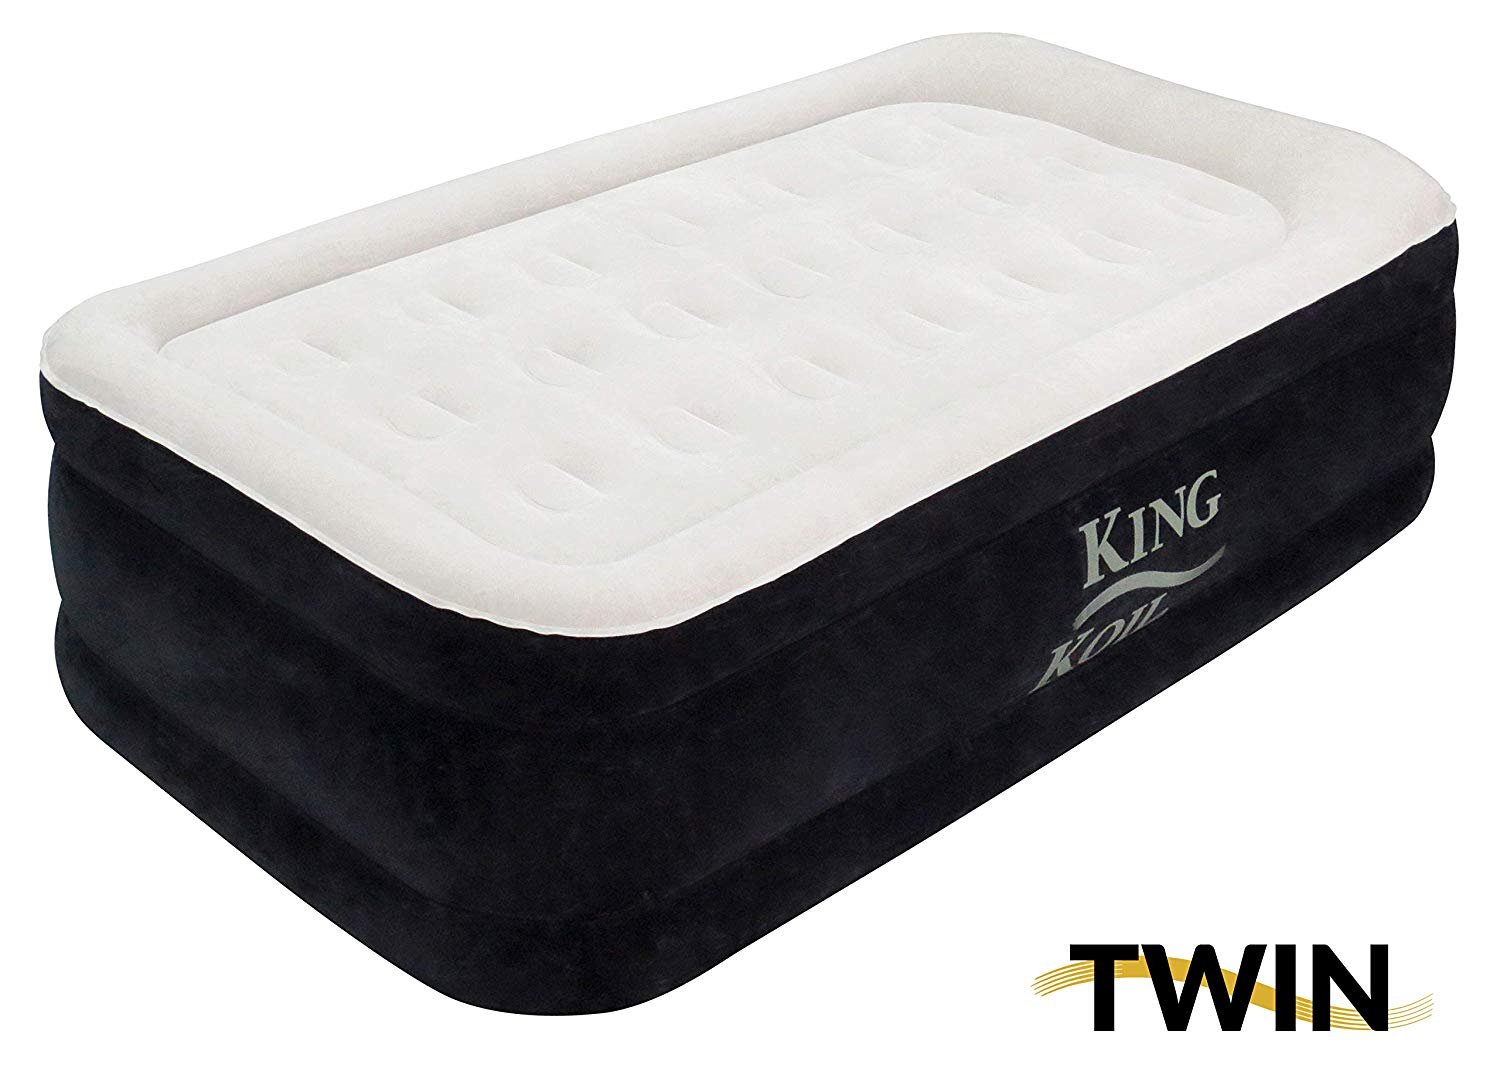 wight and length of a queen air mattress